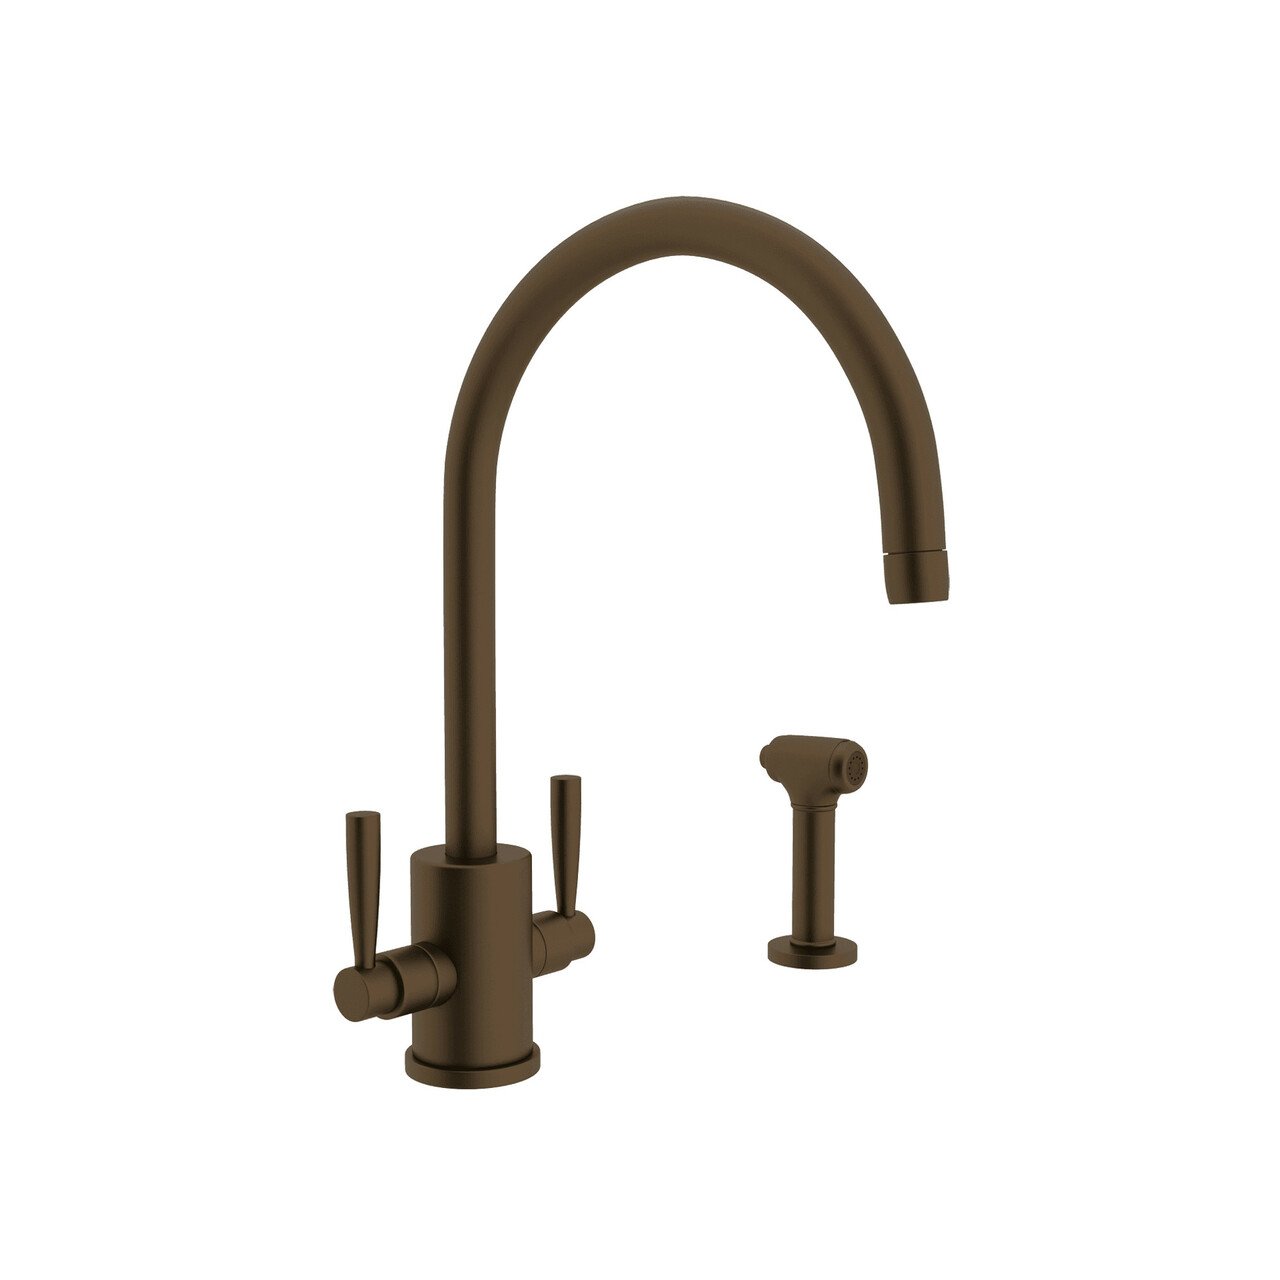 Perrin & Rowe Holborn Single Hole C Spout Kitchen Faucet with Round Body and Sidespray - BNGBath